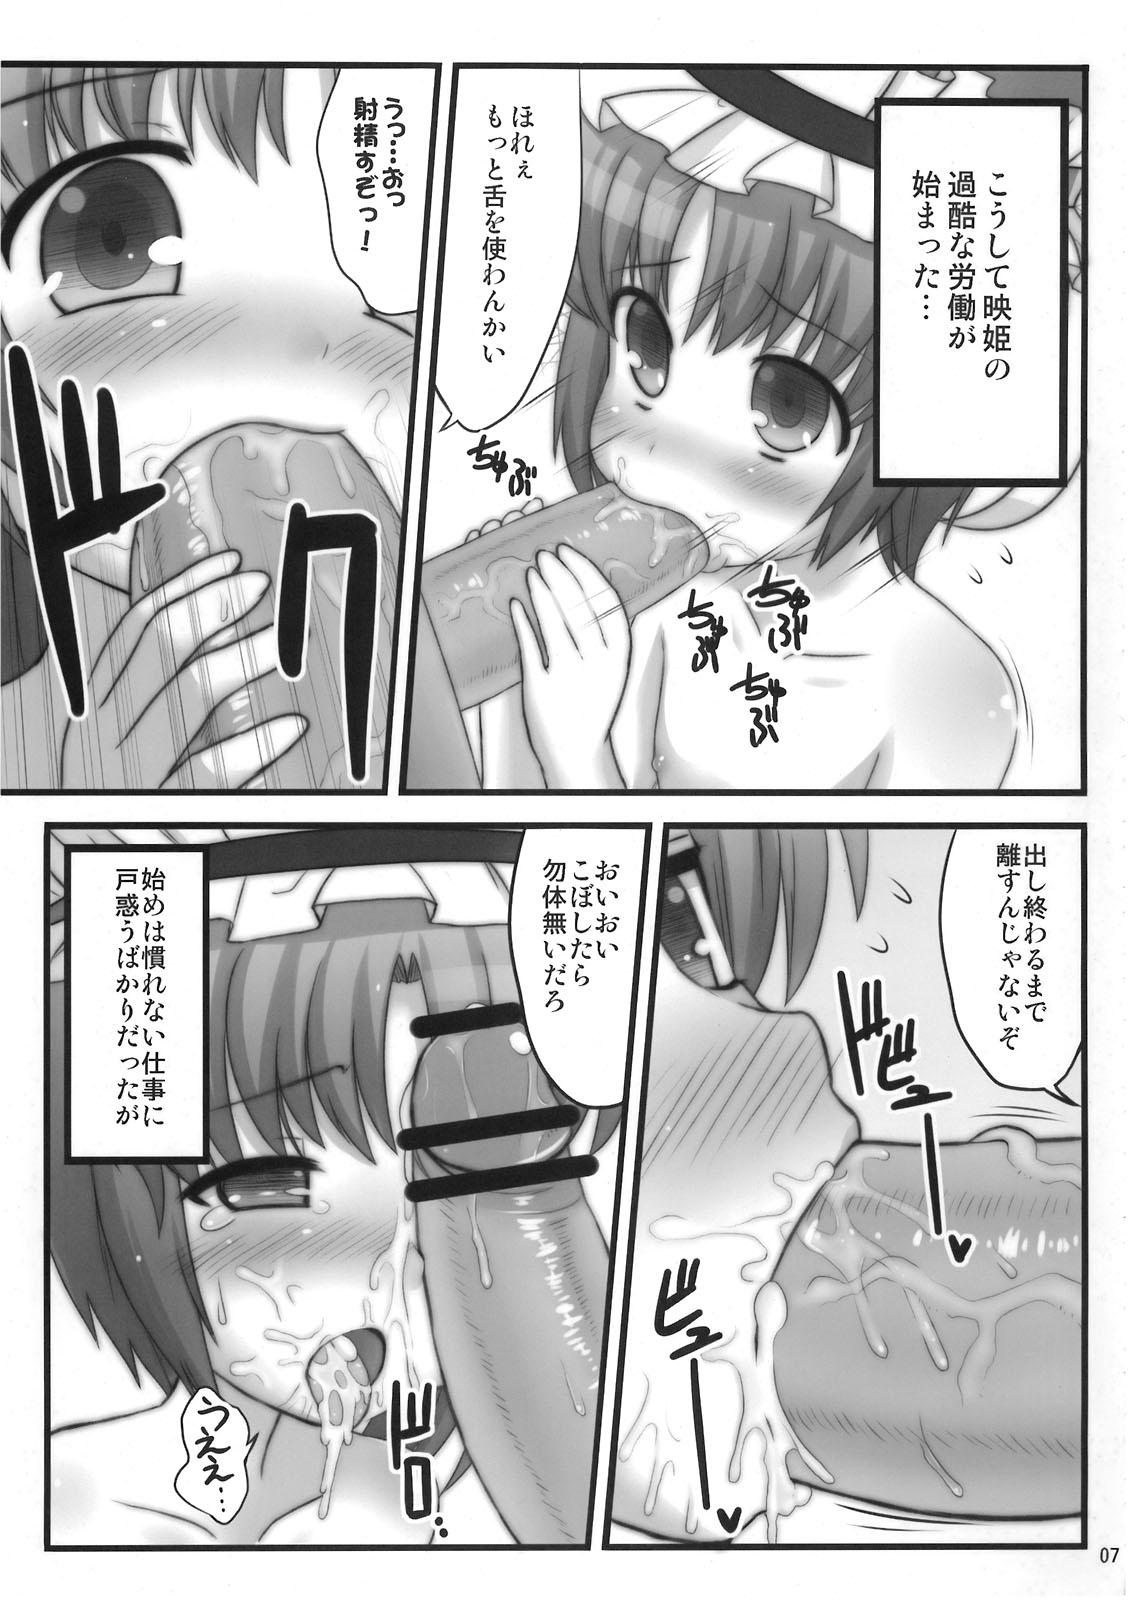 Celebrity Porn 24 Jikan Roudou - Touhou project Shaved - Page 8